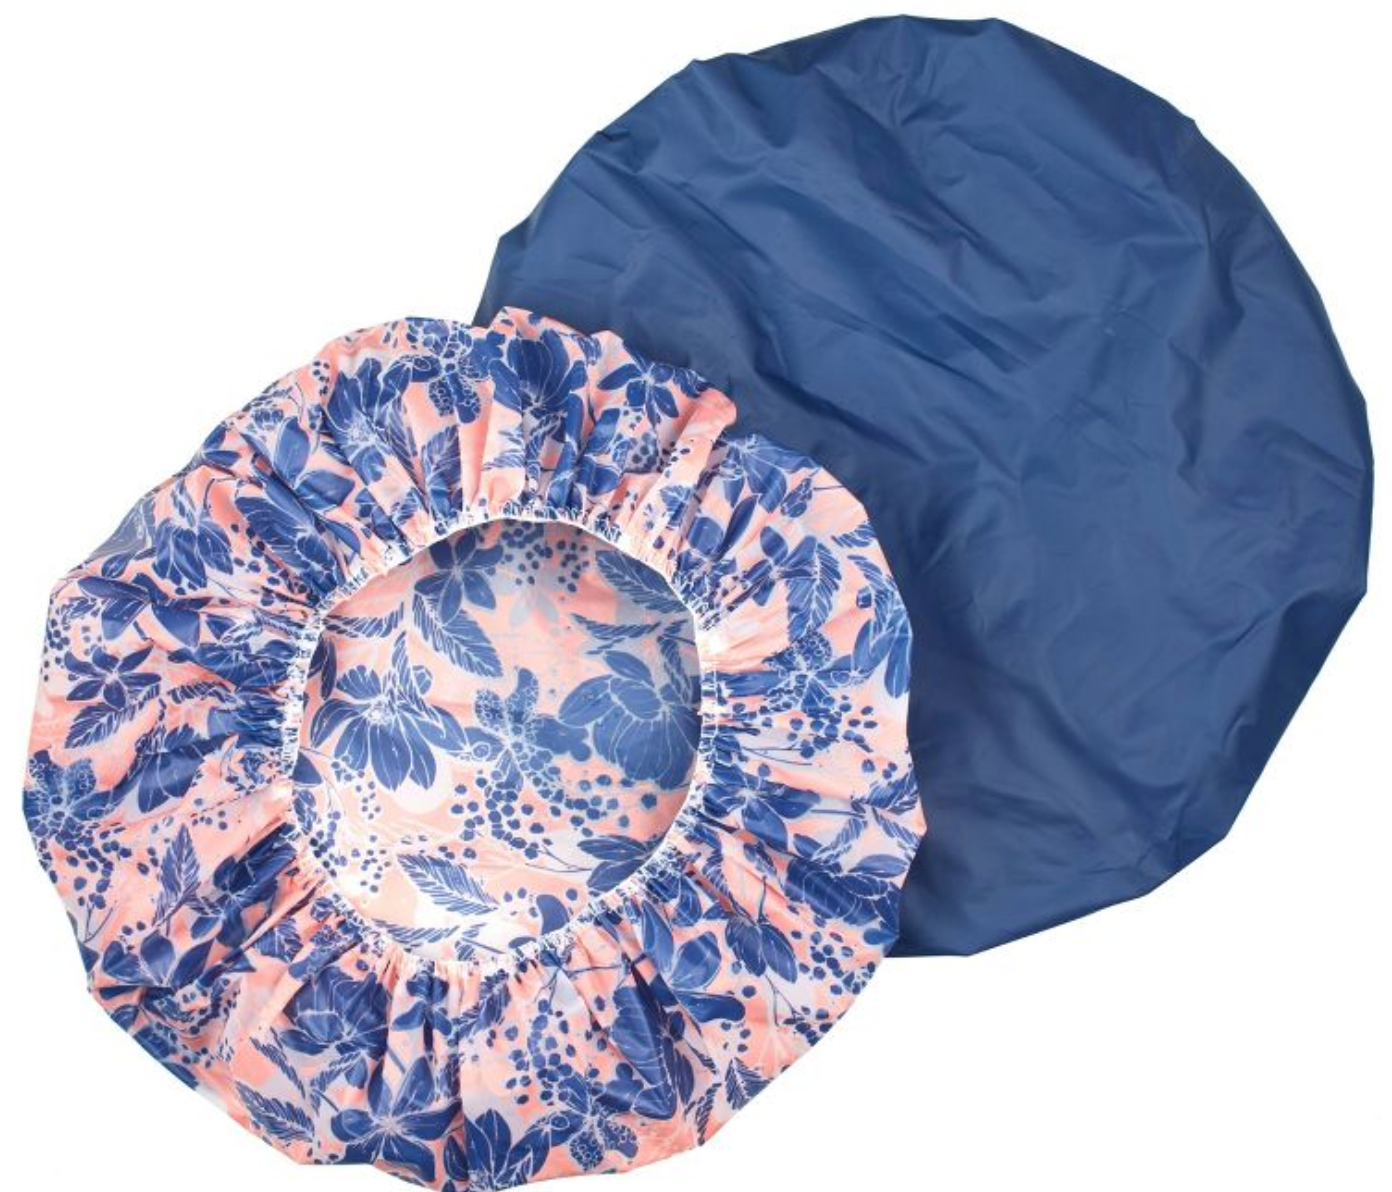 Reusable Shower Cap & Bath Cap, Lined, Oversized Waterproof Shower Caps  Large Designed for all Hair Lengths with Lining & Elastic Band Stretch Hem